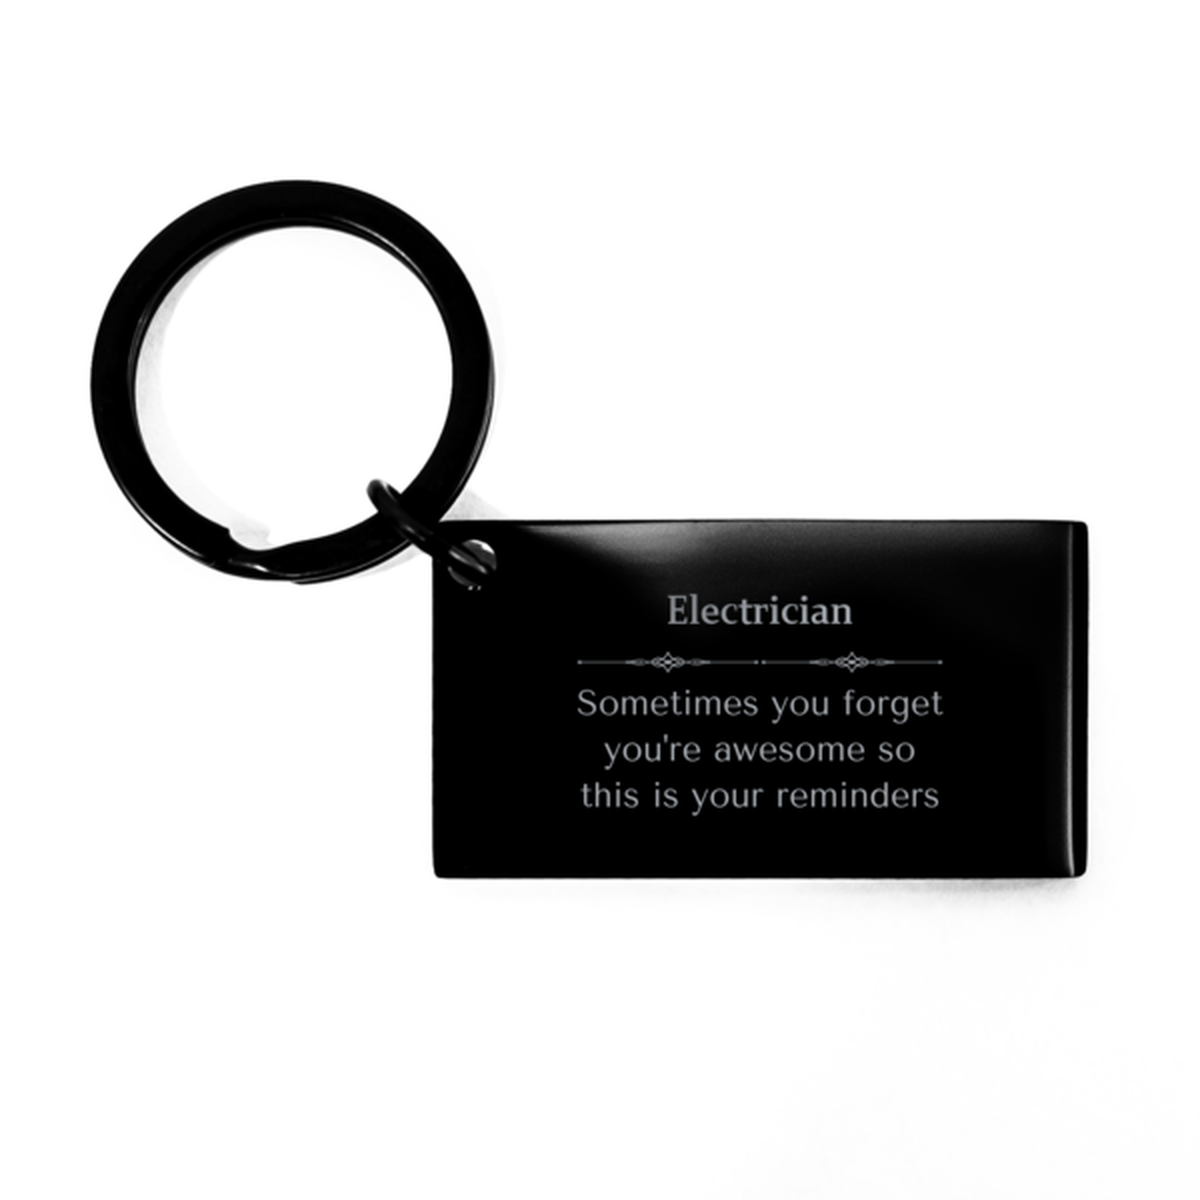 Sentimental Electrician Keychain, Insurance Sales Agent Sometimes you forget you're awesome so this is your reminders, Graduation Christmas Birthday Gifts for Electrician, Men, Women, Coworkers